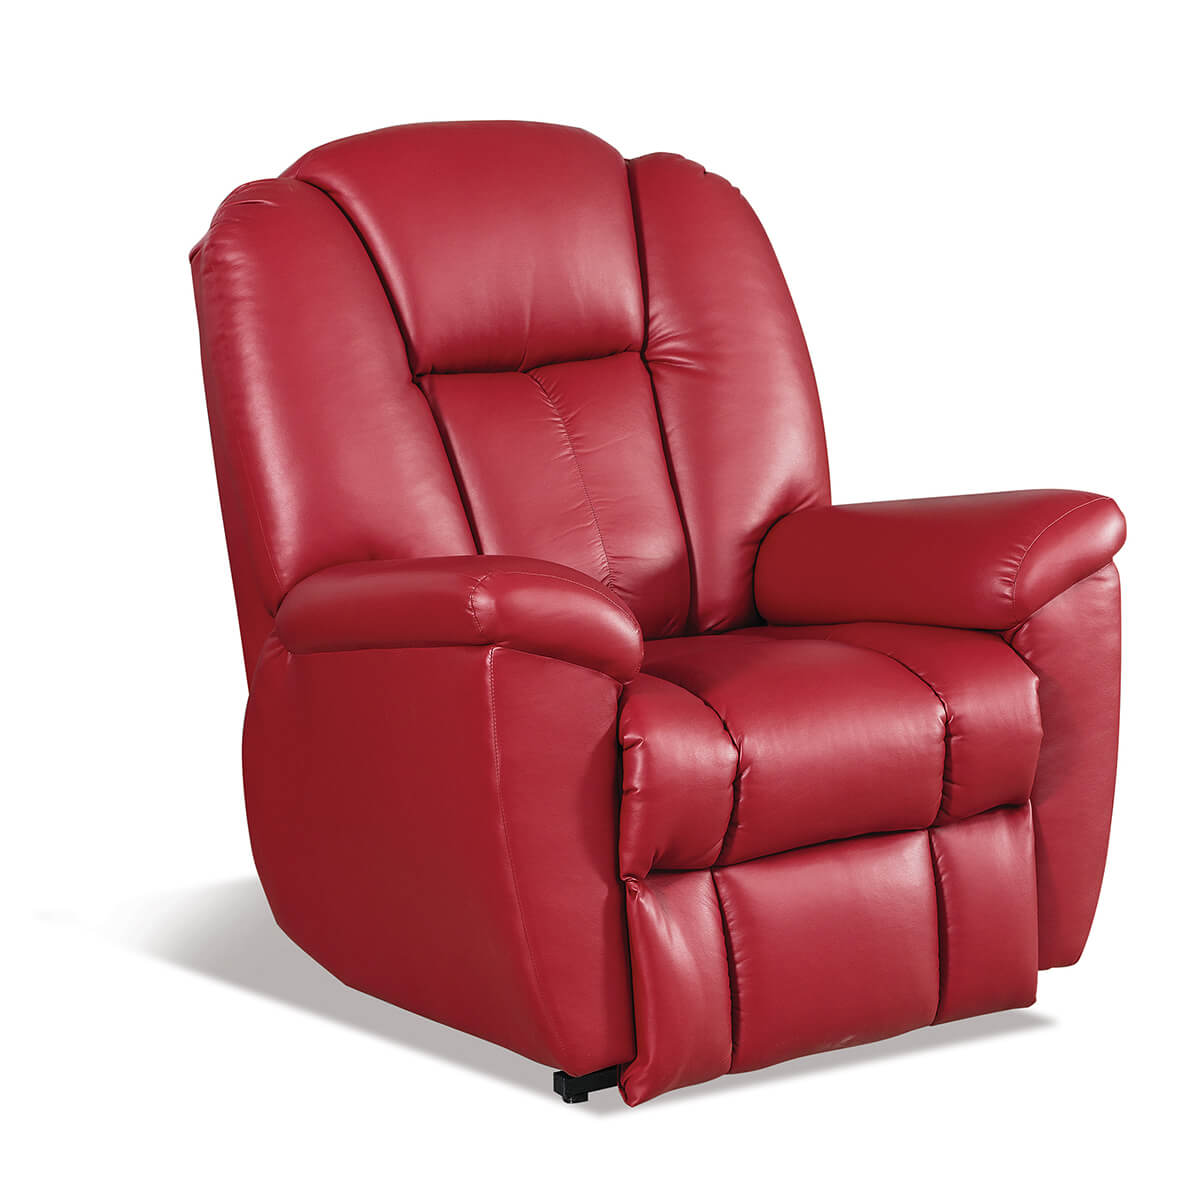 Read more about the article Dutch Boy Lifter Recliner